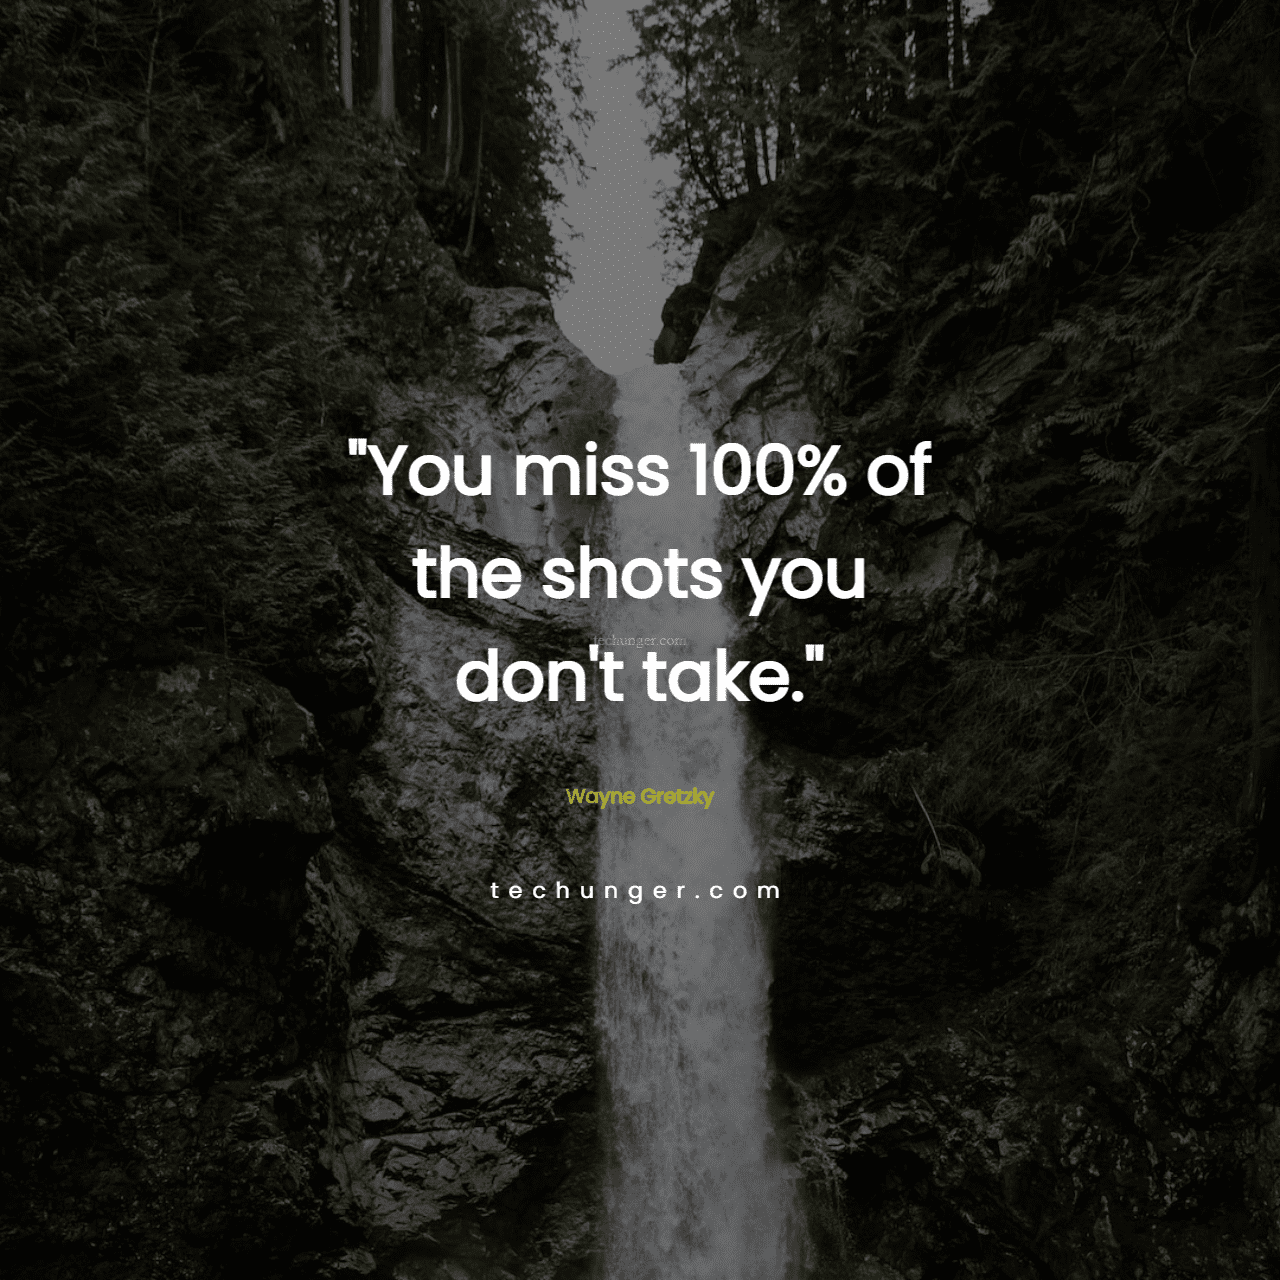 motivational,inspirational,quotes,You miss 100% of the shots you don't take.Wayne Gretzky